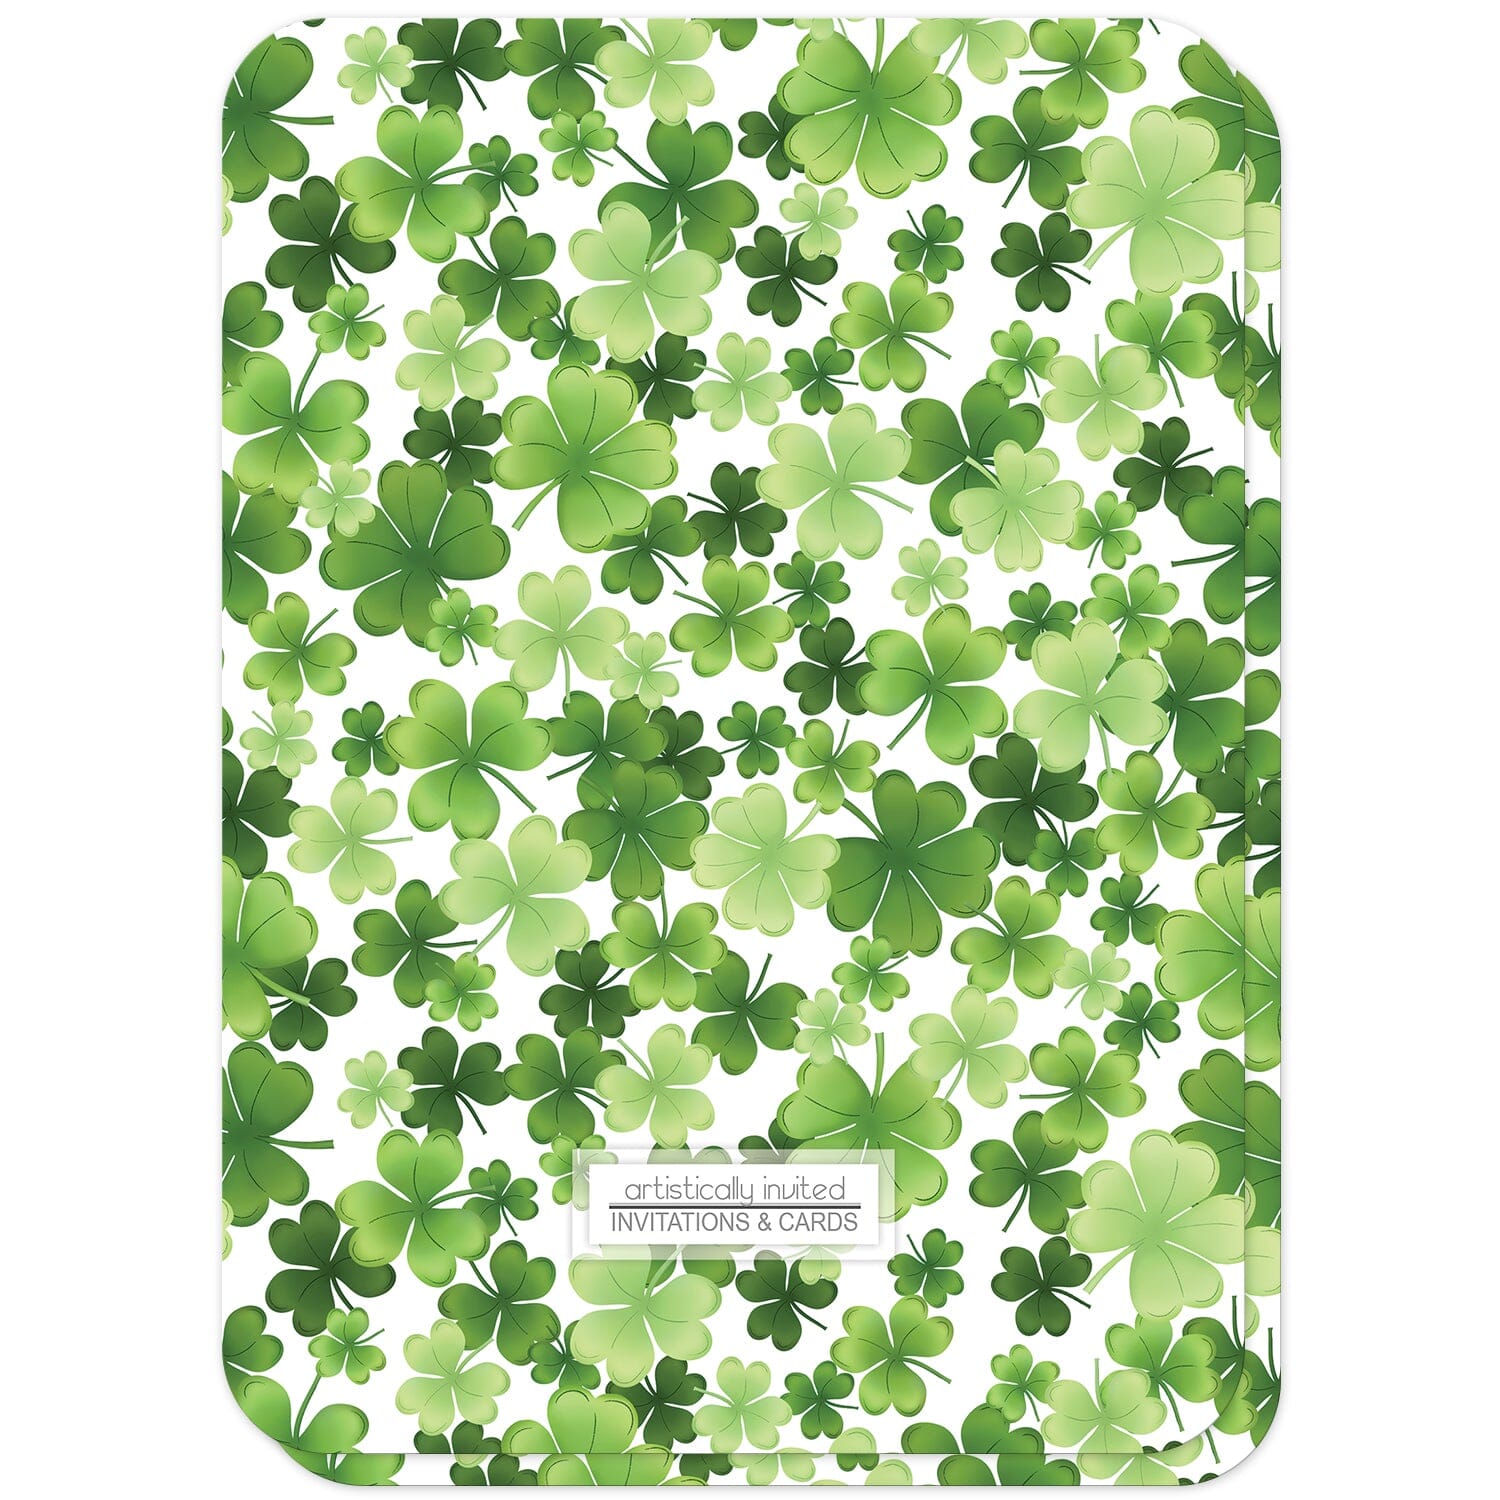 Shamrocks and 4-Leaf Clovers Bridal Shower Invitations (back with rounded corners) at Artistically Invited.